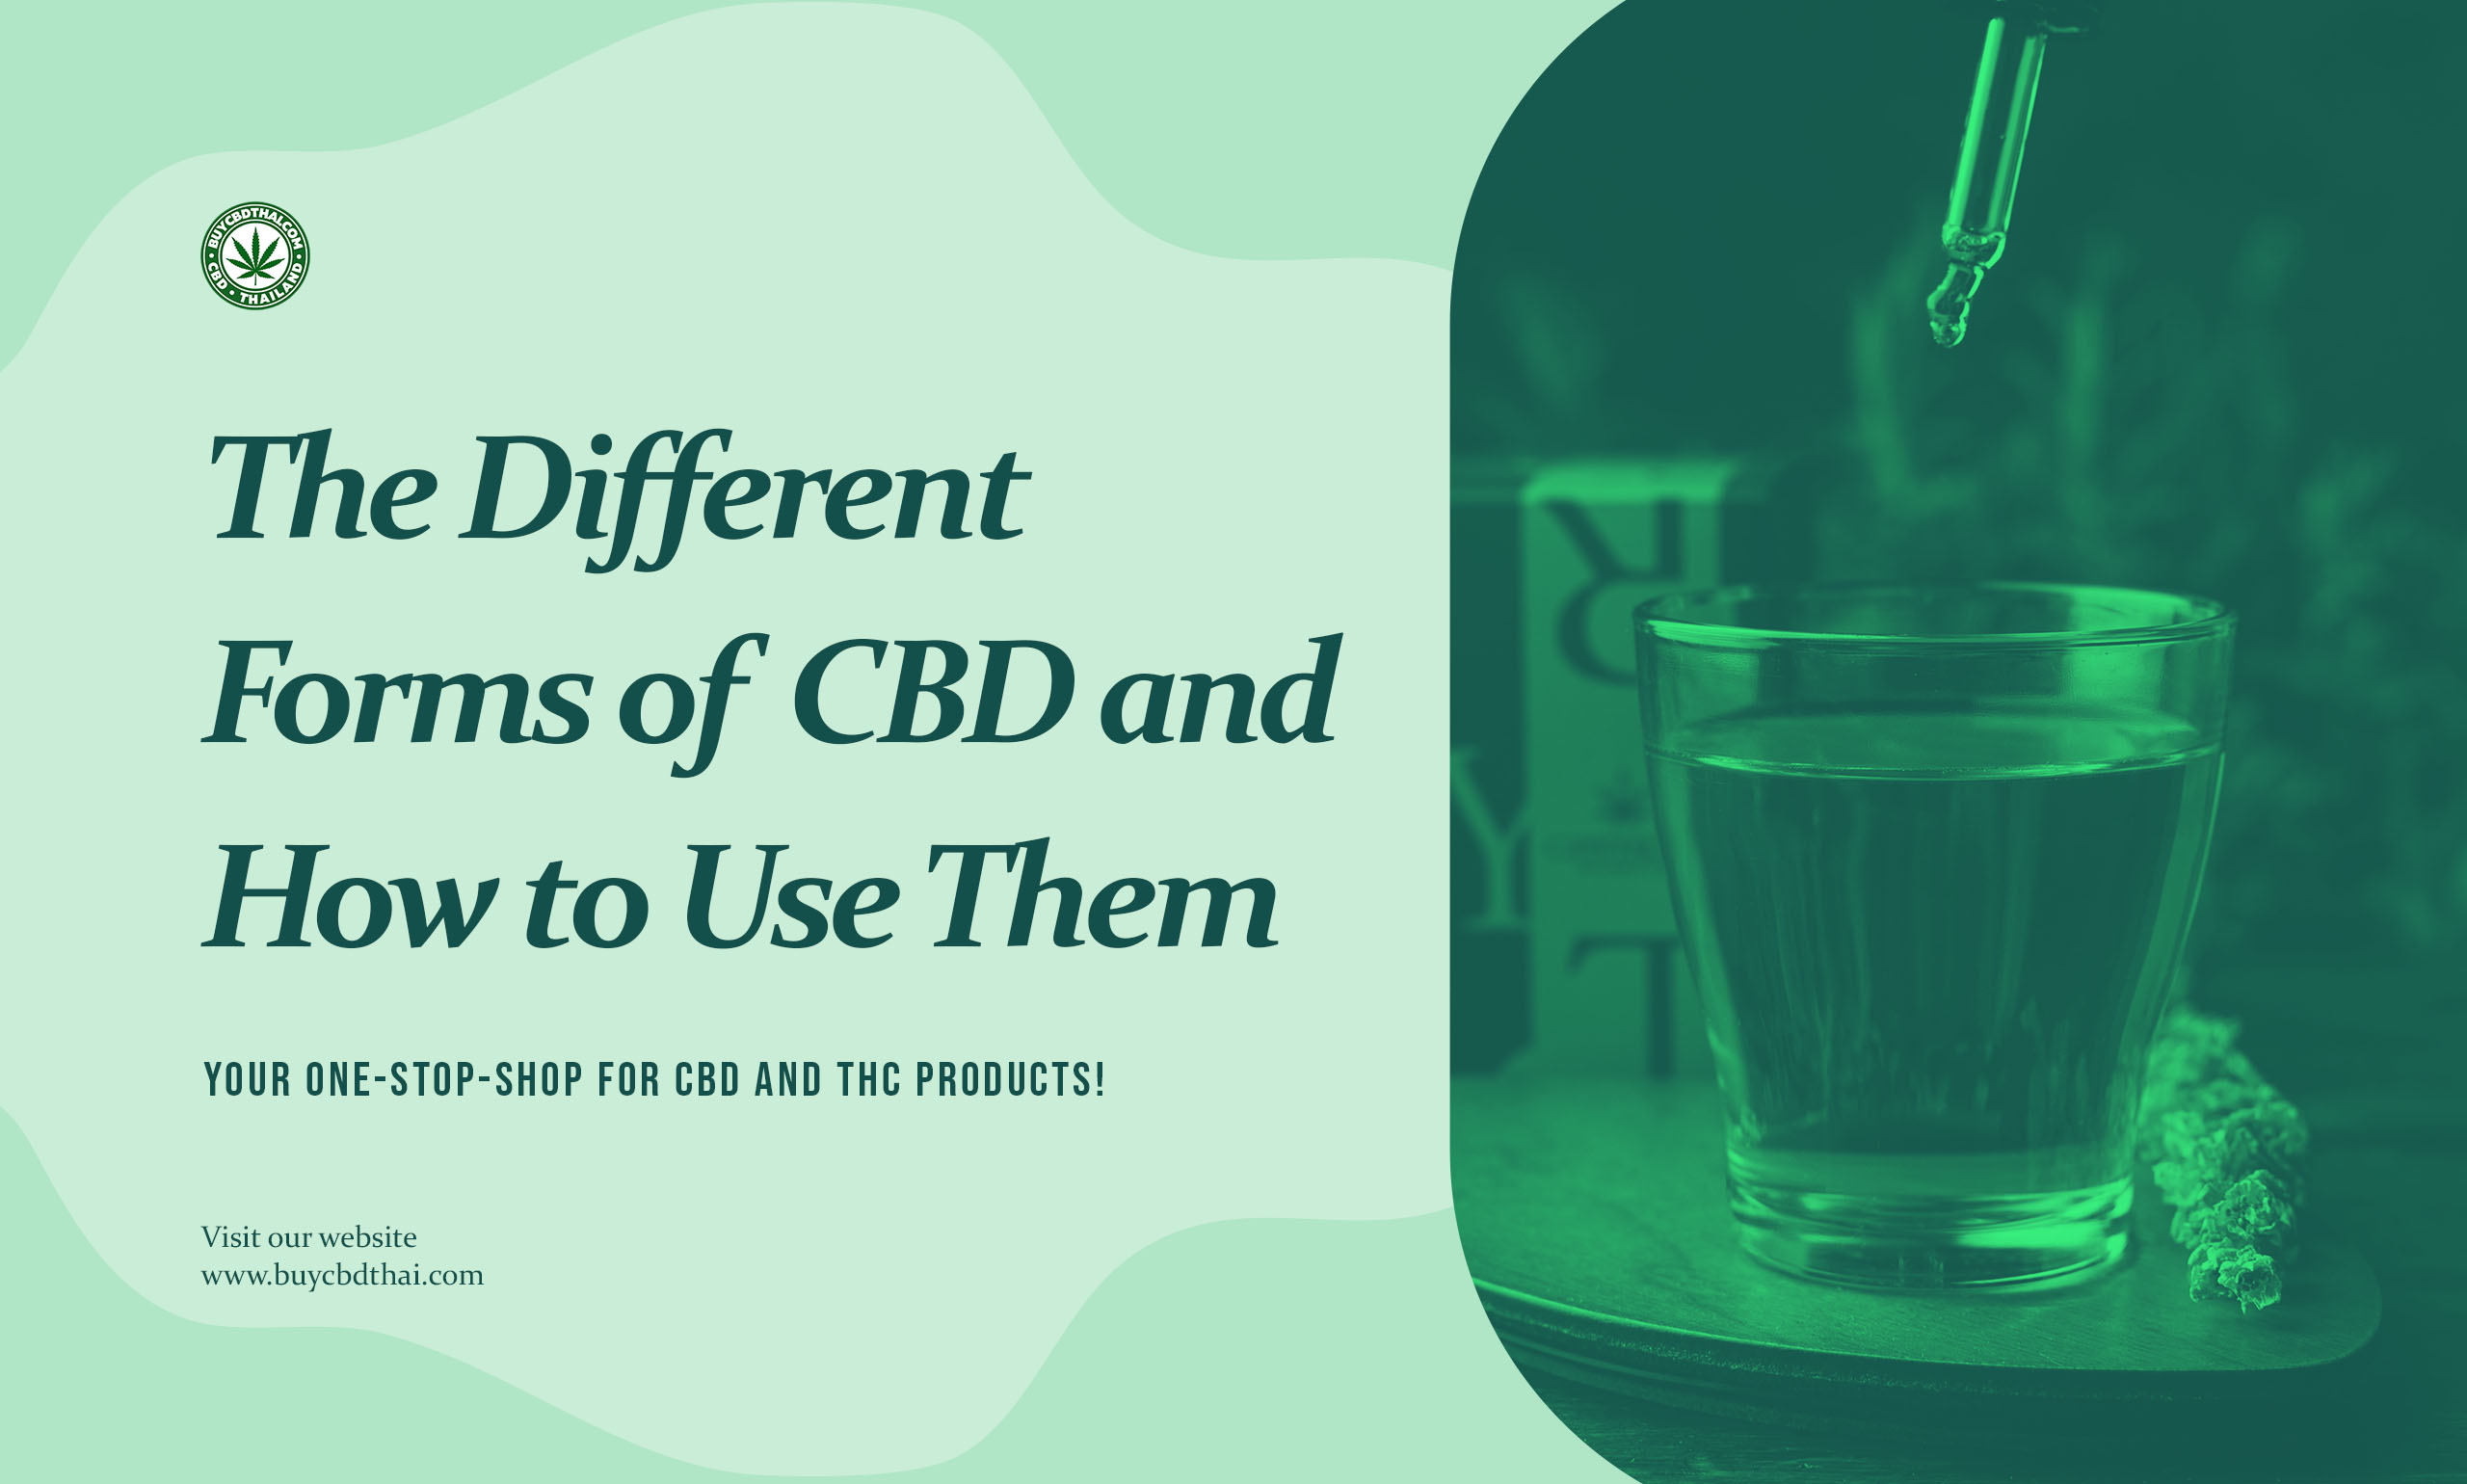 The Different Forms of CBD and How to Use Them